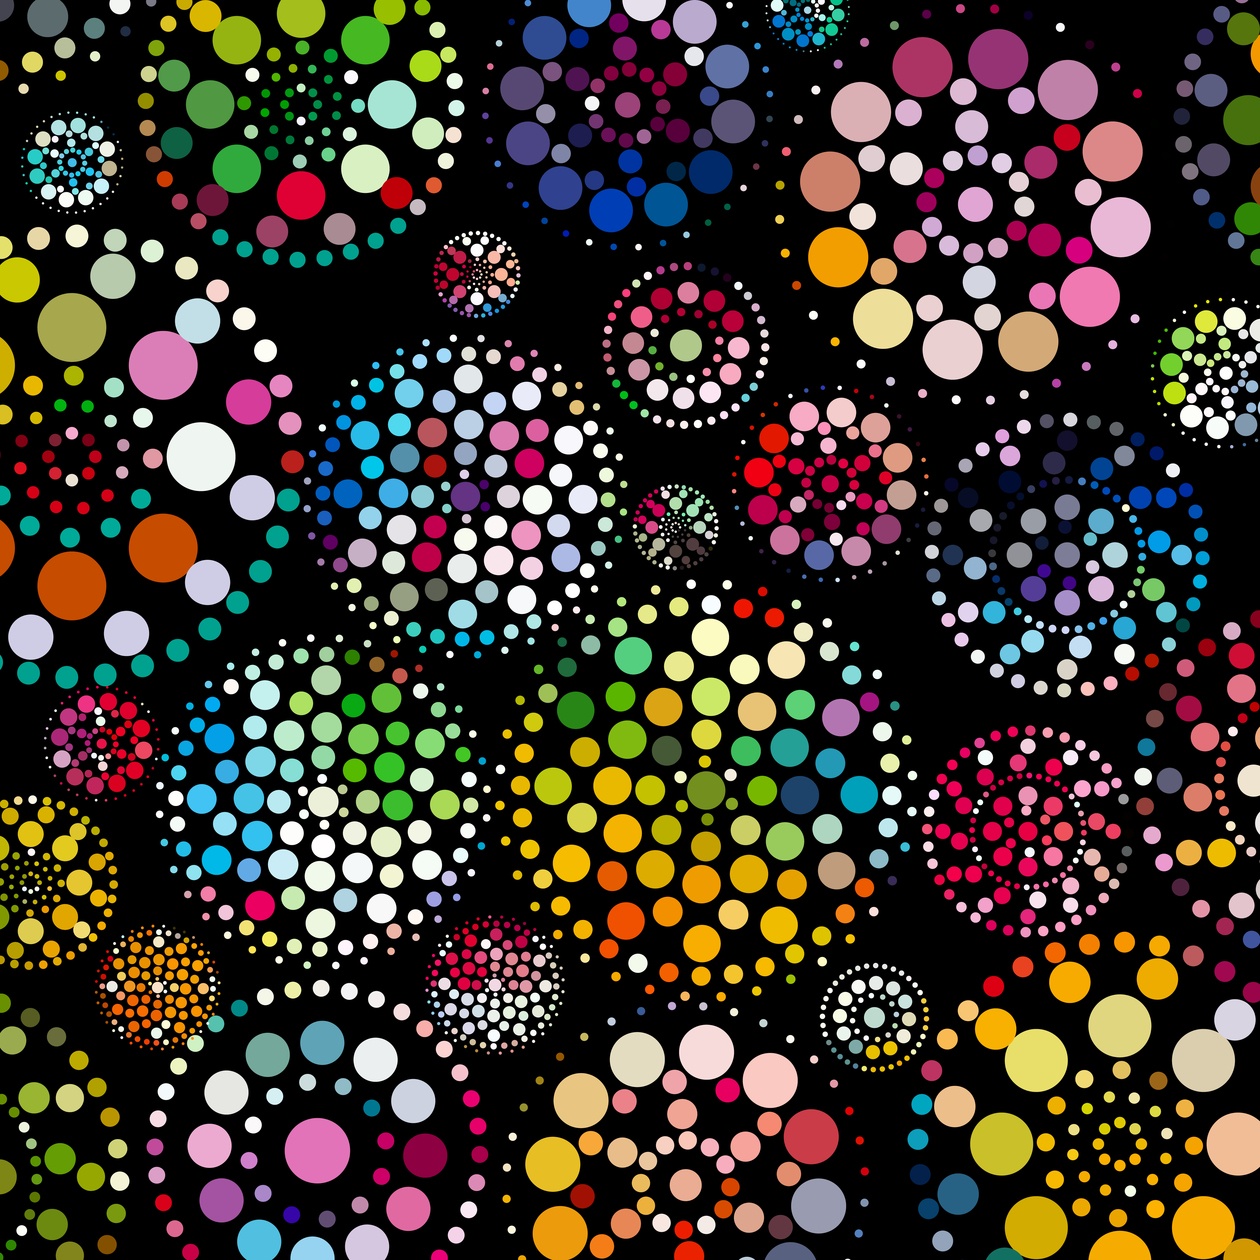 abstract colorful dots pattern background Photoshop brush